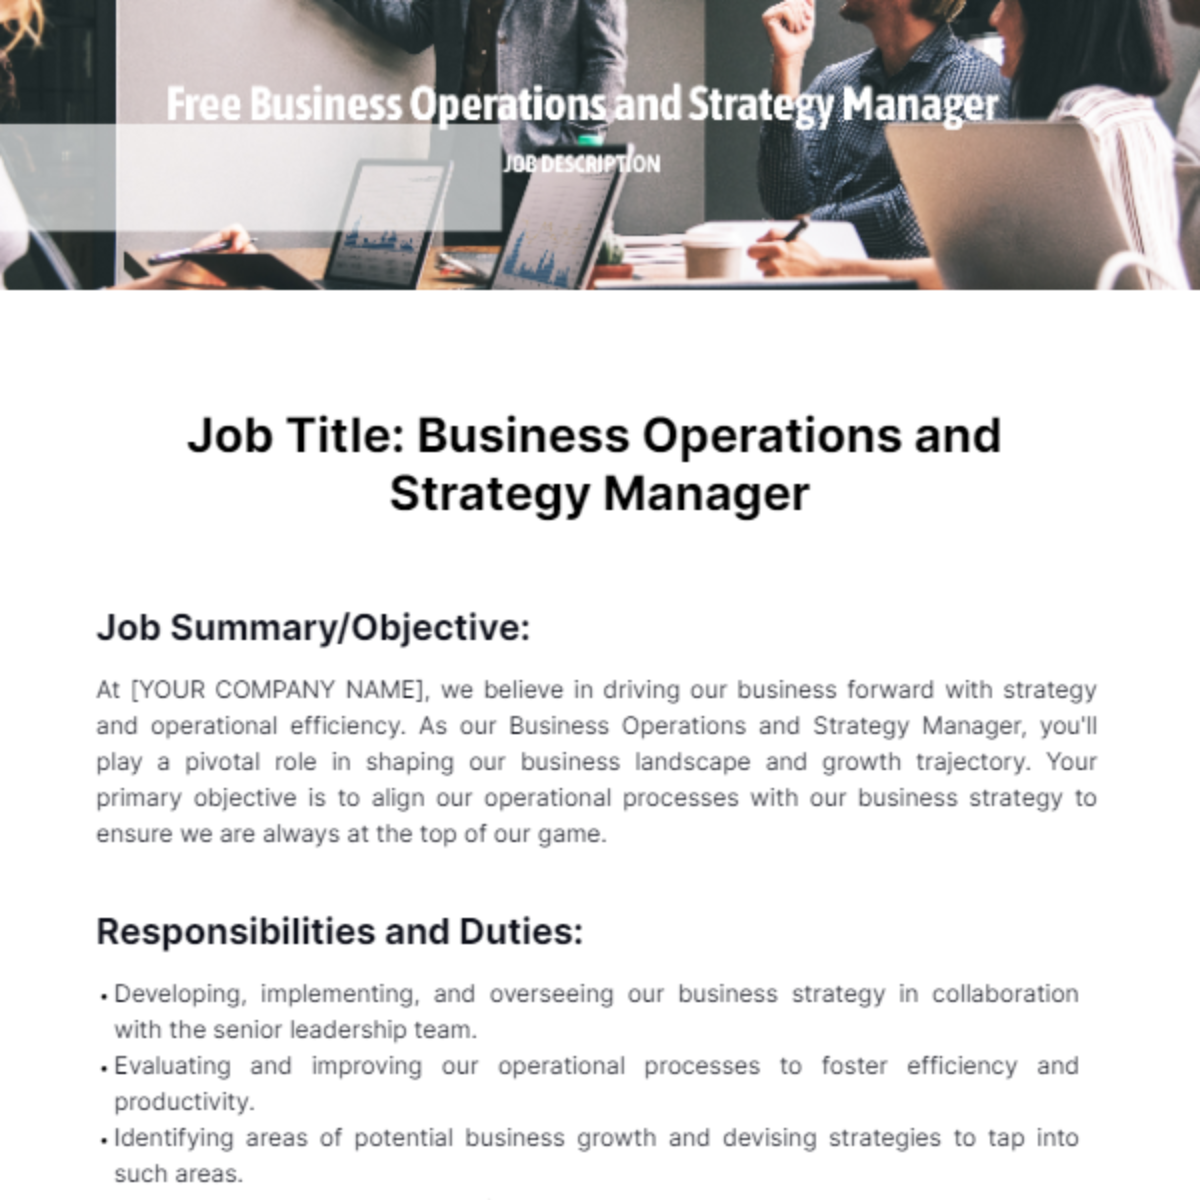 Free Business Operations and Strategy Manager Job Description Template